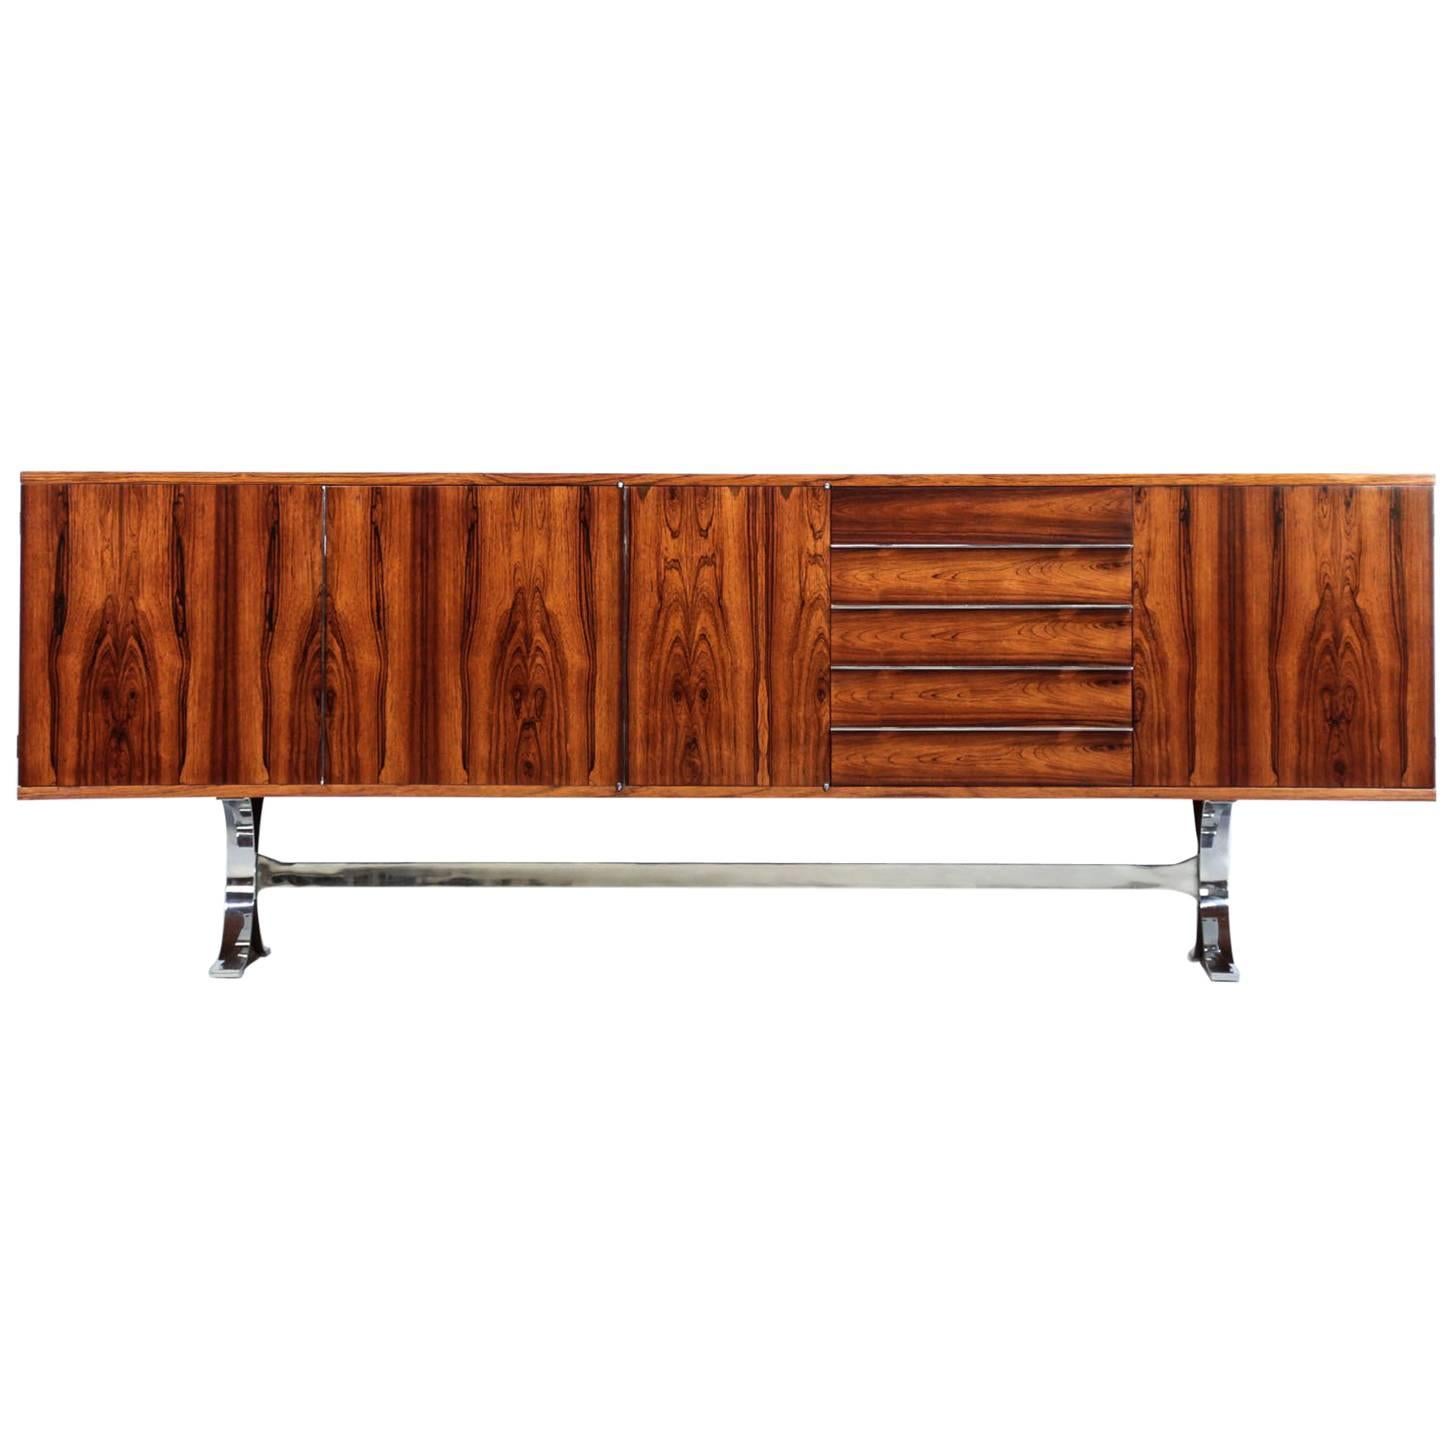 Jean René Caillette Sideboard "Silvie" for Charon, Rosewood